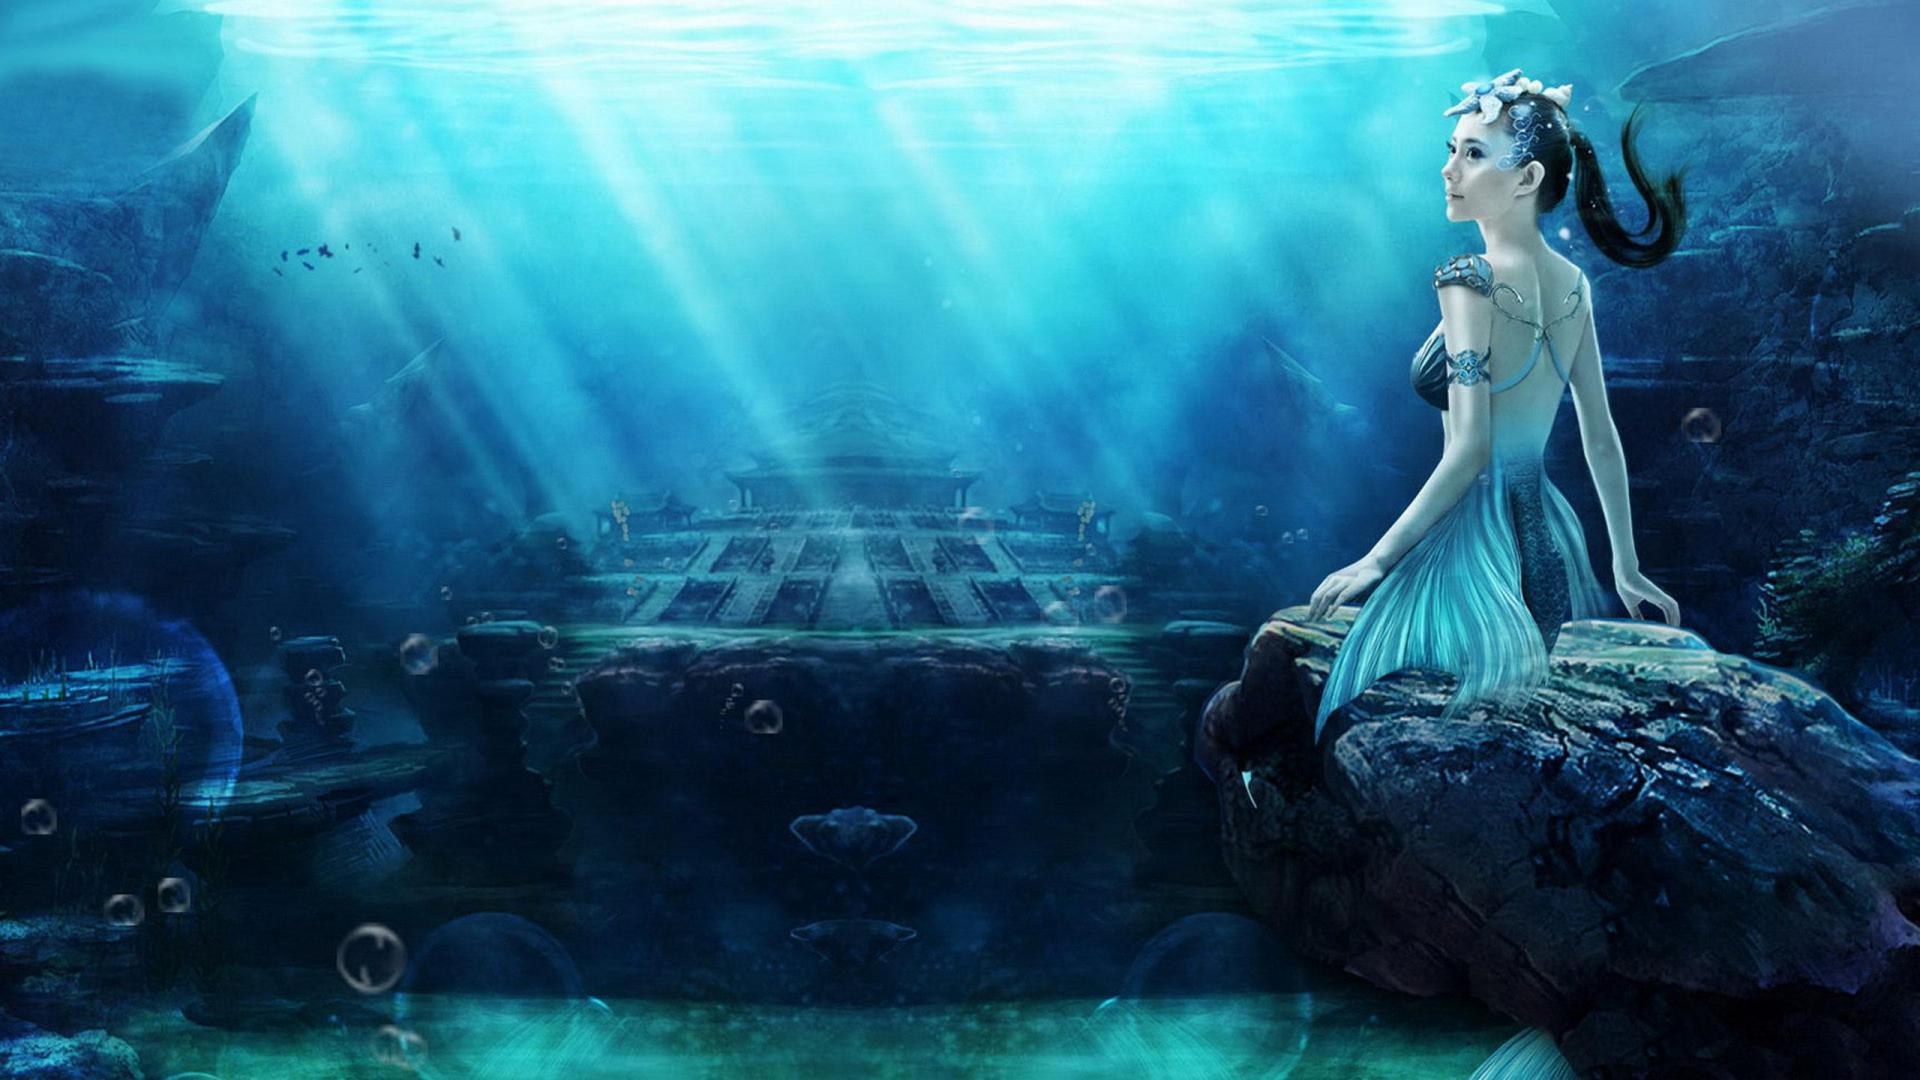 Mermaid Background Wallpaper High Definition Quality